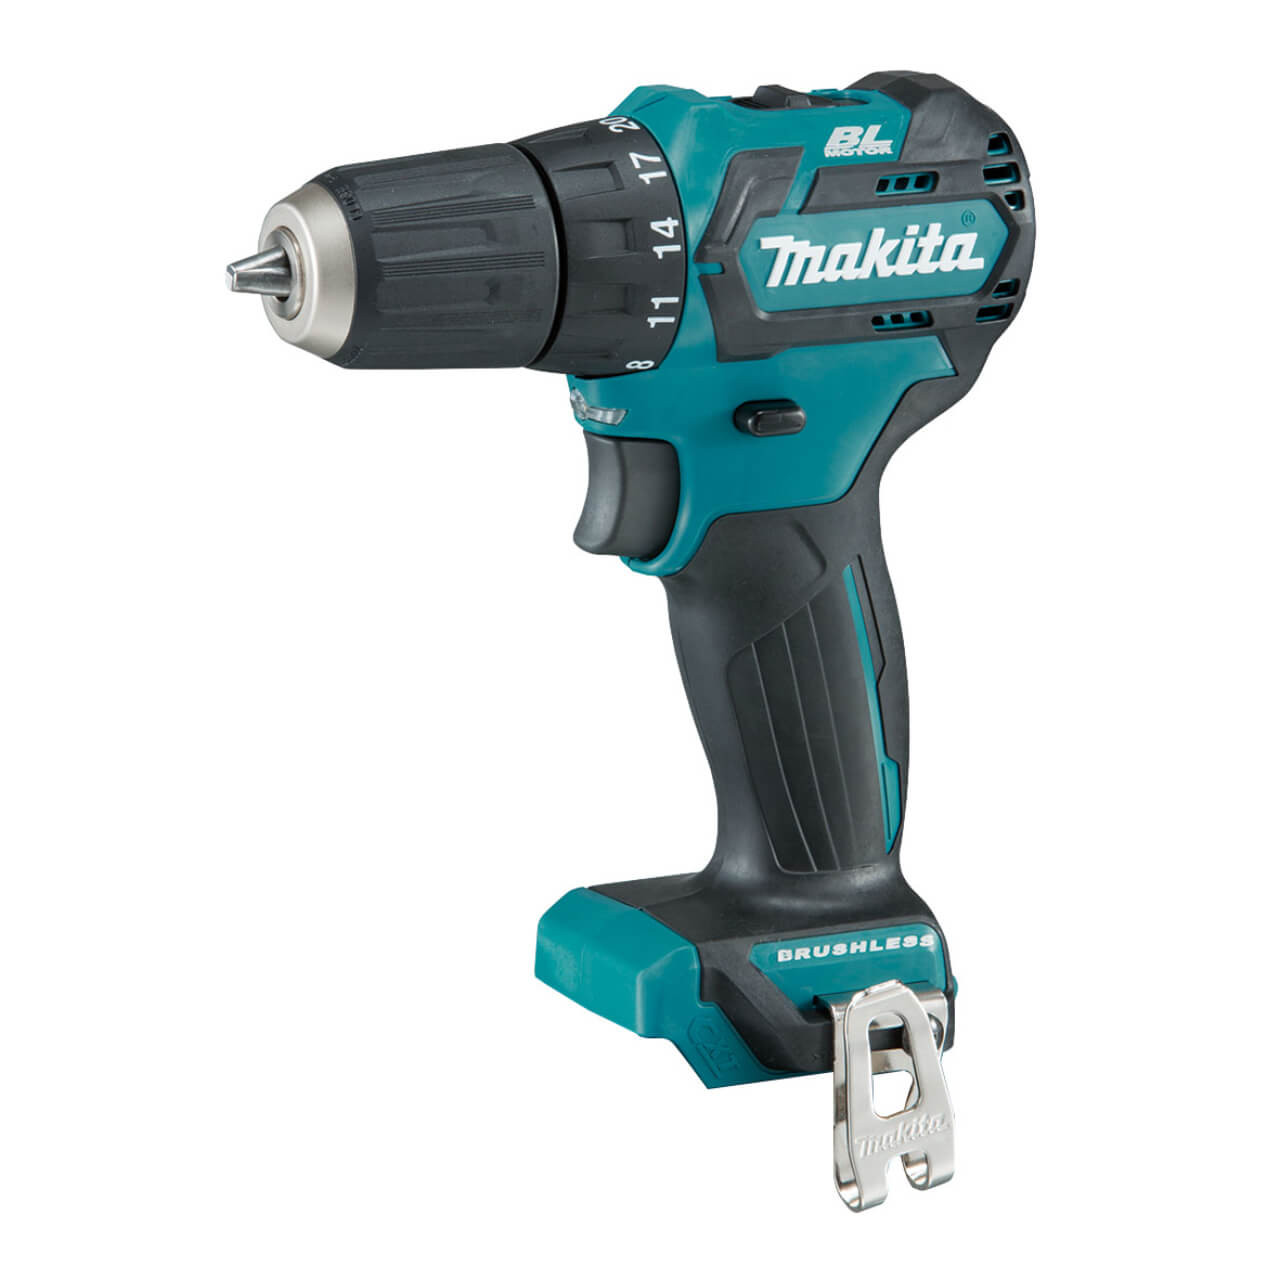 Makita 12V Max BRUSHLESS Driver Drill Kit - Includes 2 x 2.0Ah Batteries. Rapid Charger & Case